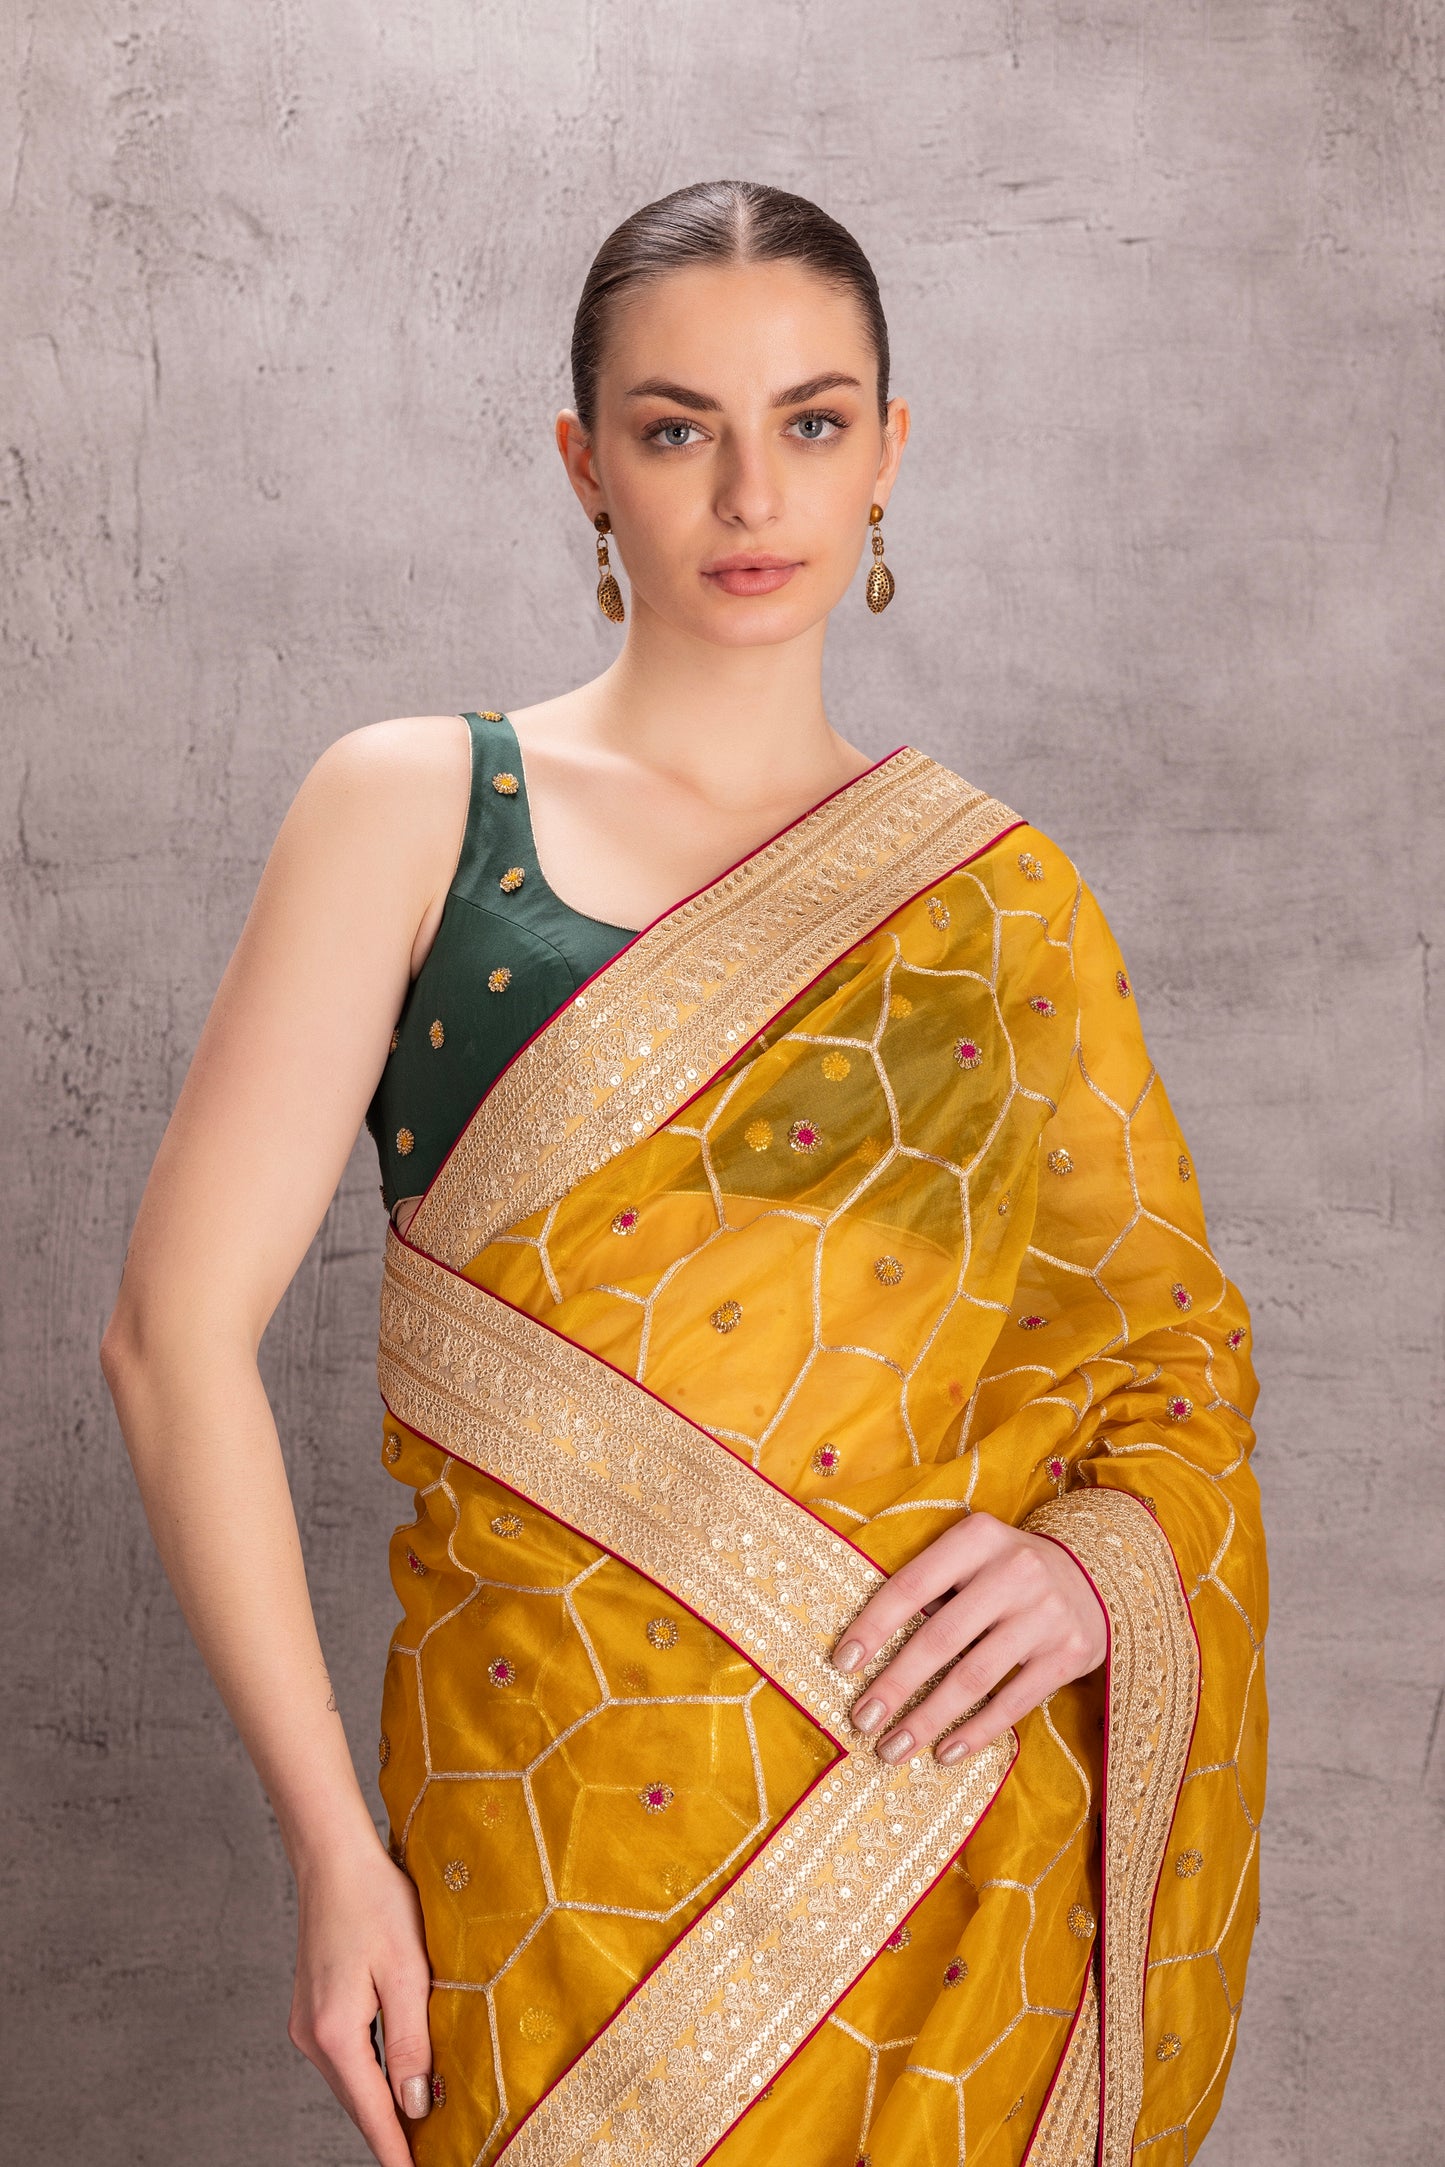 Yellow Organza Silk Saree Comes With Green Satin Silk Stitched Embroidered Blouse & Organic Cotton Stitched Petticoat (3 Pcs)